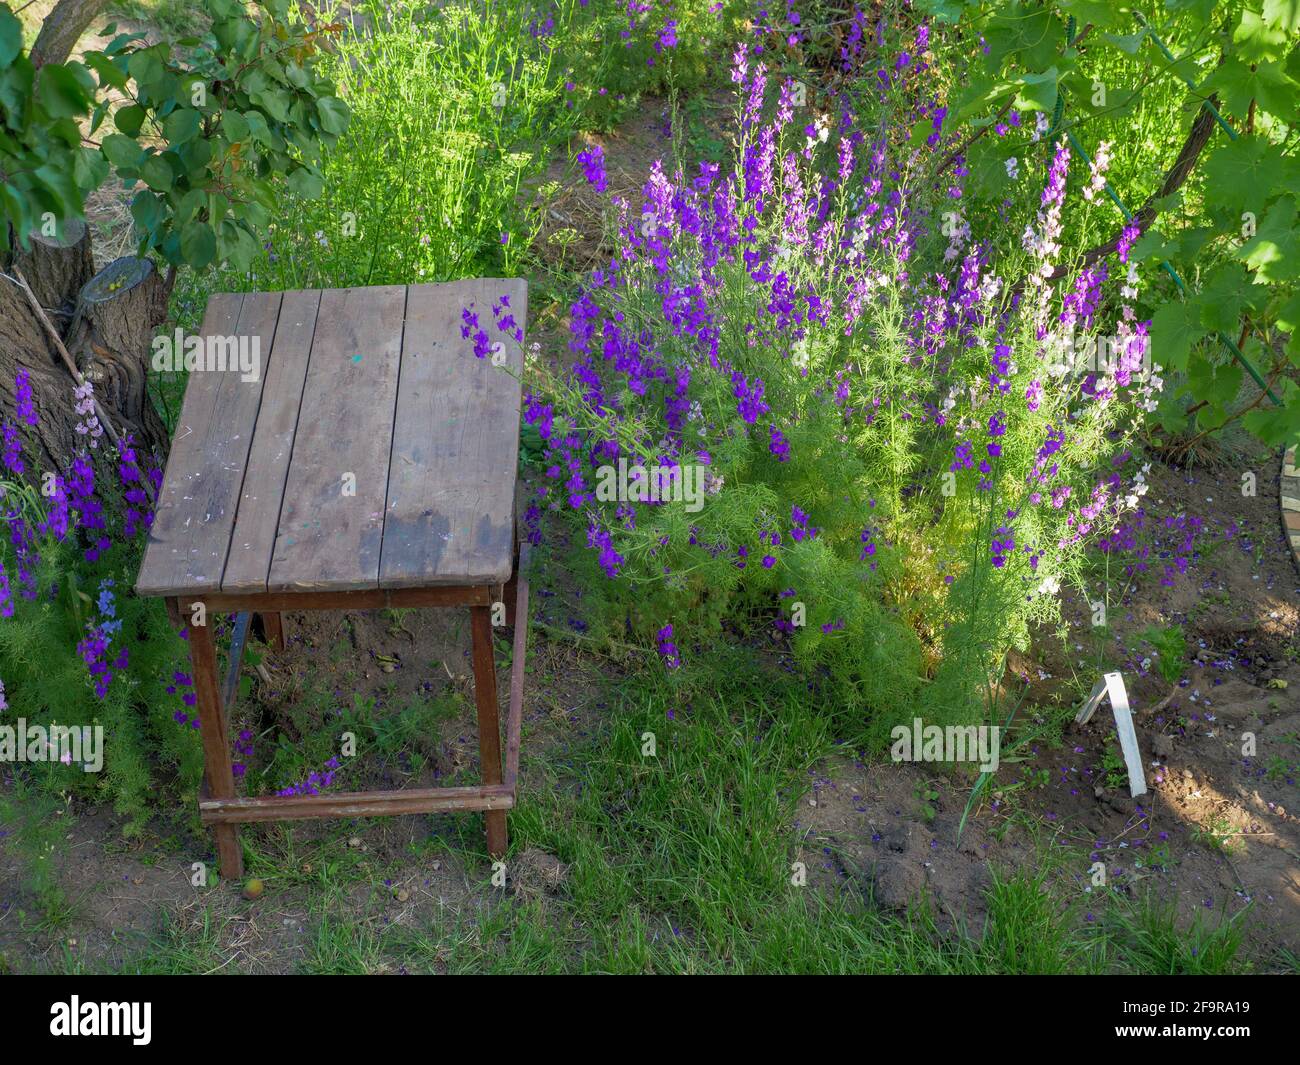 Top view over the rough rustic wooden table surrounded by beautiful purple Delphinium Consolida (Consolida regalis) flowers blooming around. Stock Photo